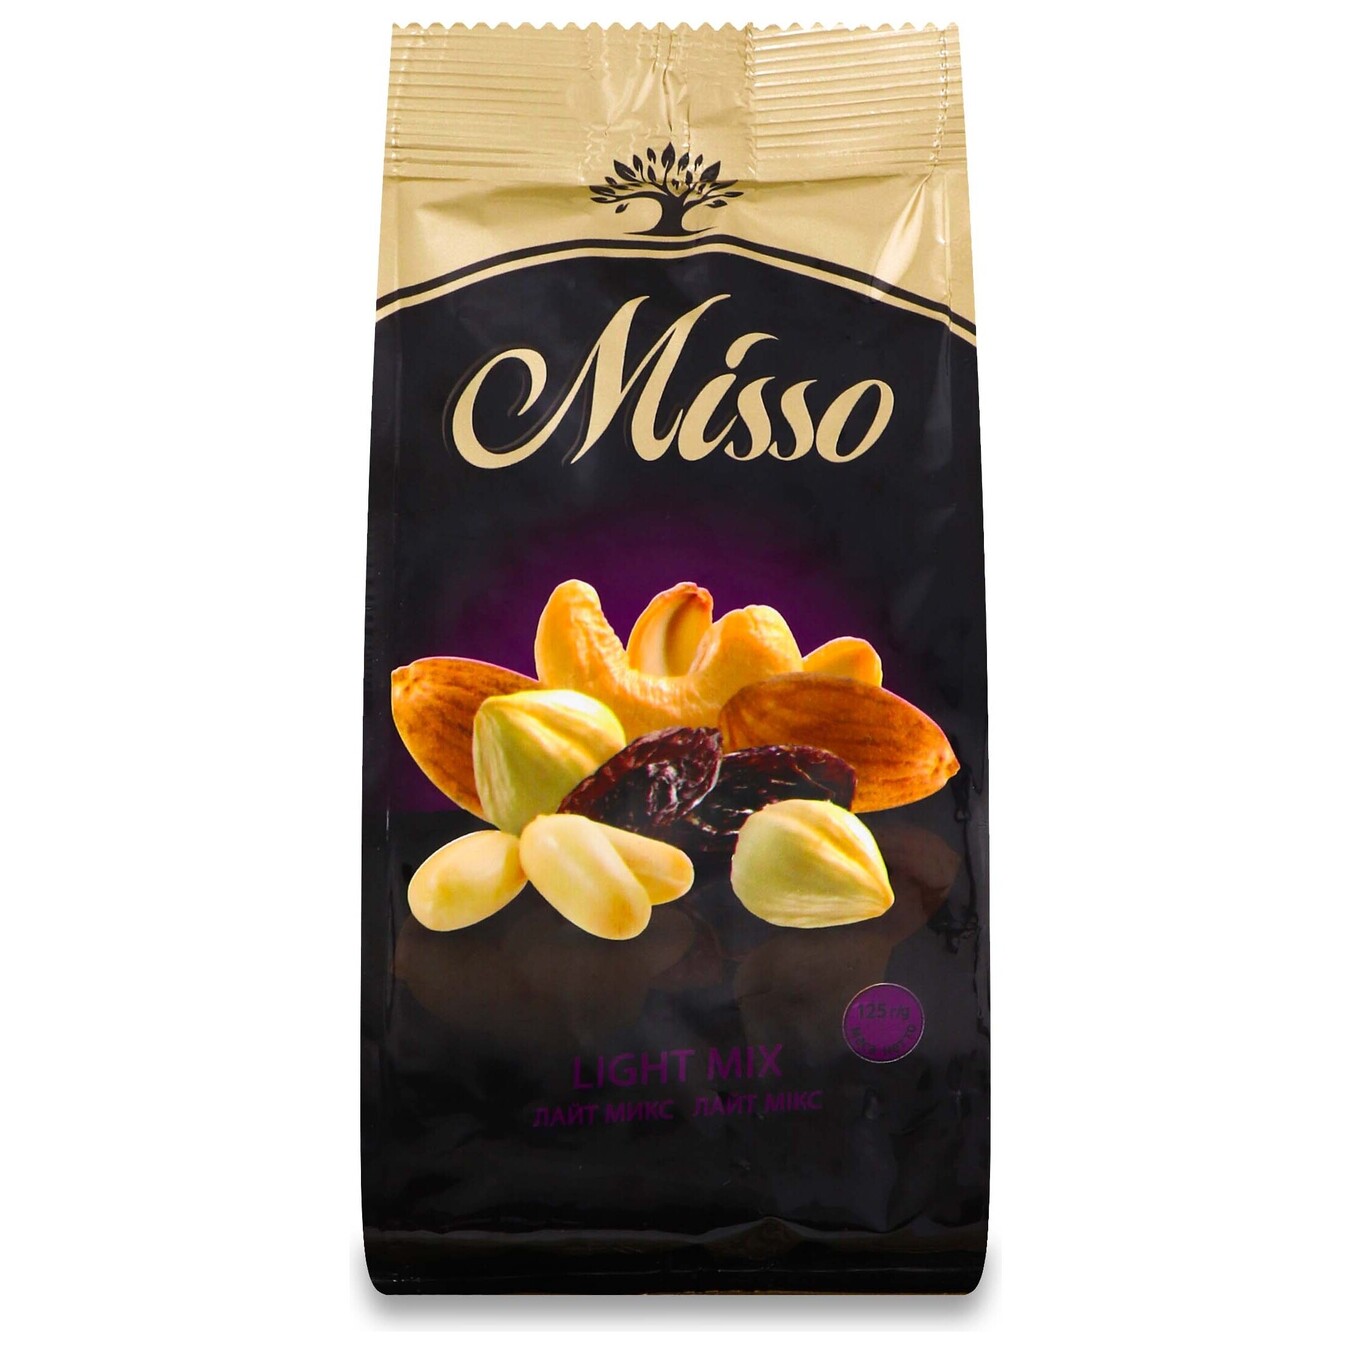 Assorted Misso fruit and nut Light Mix 125